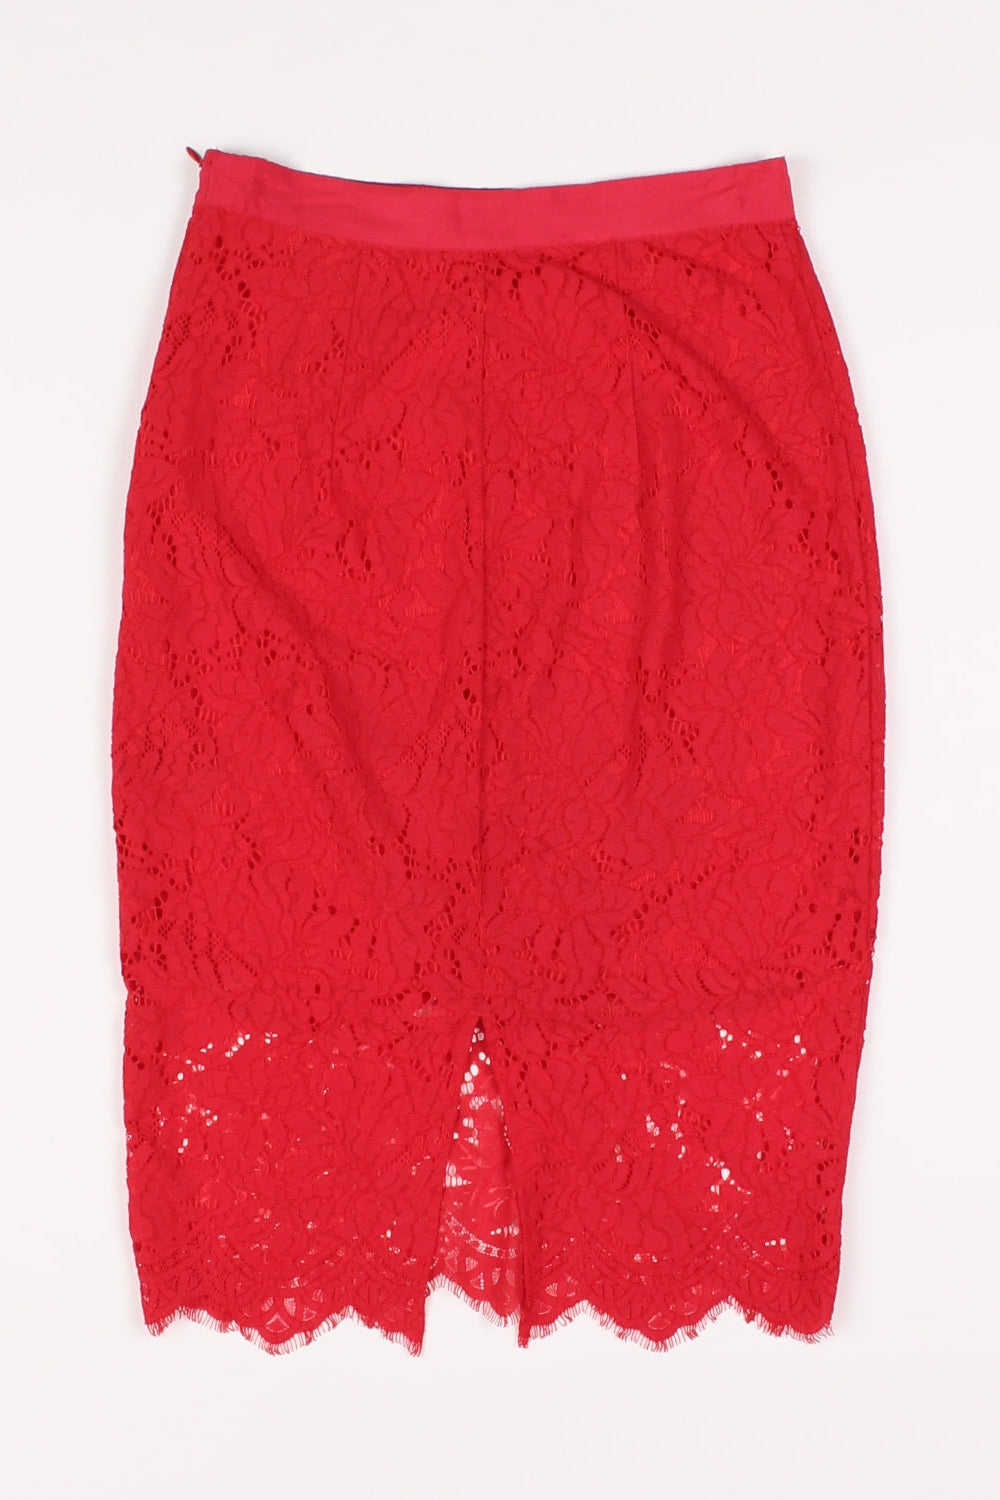 H&amp;M Red Lace Midi Skirt 8